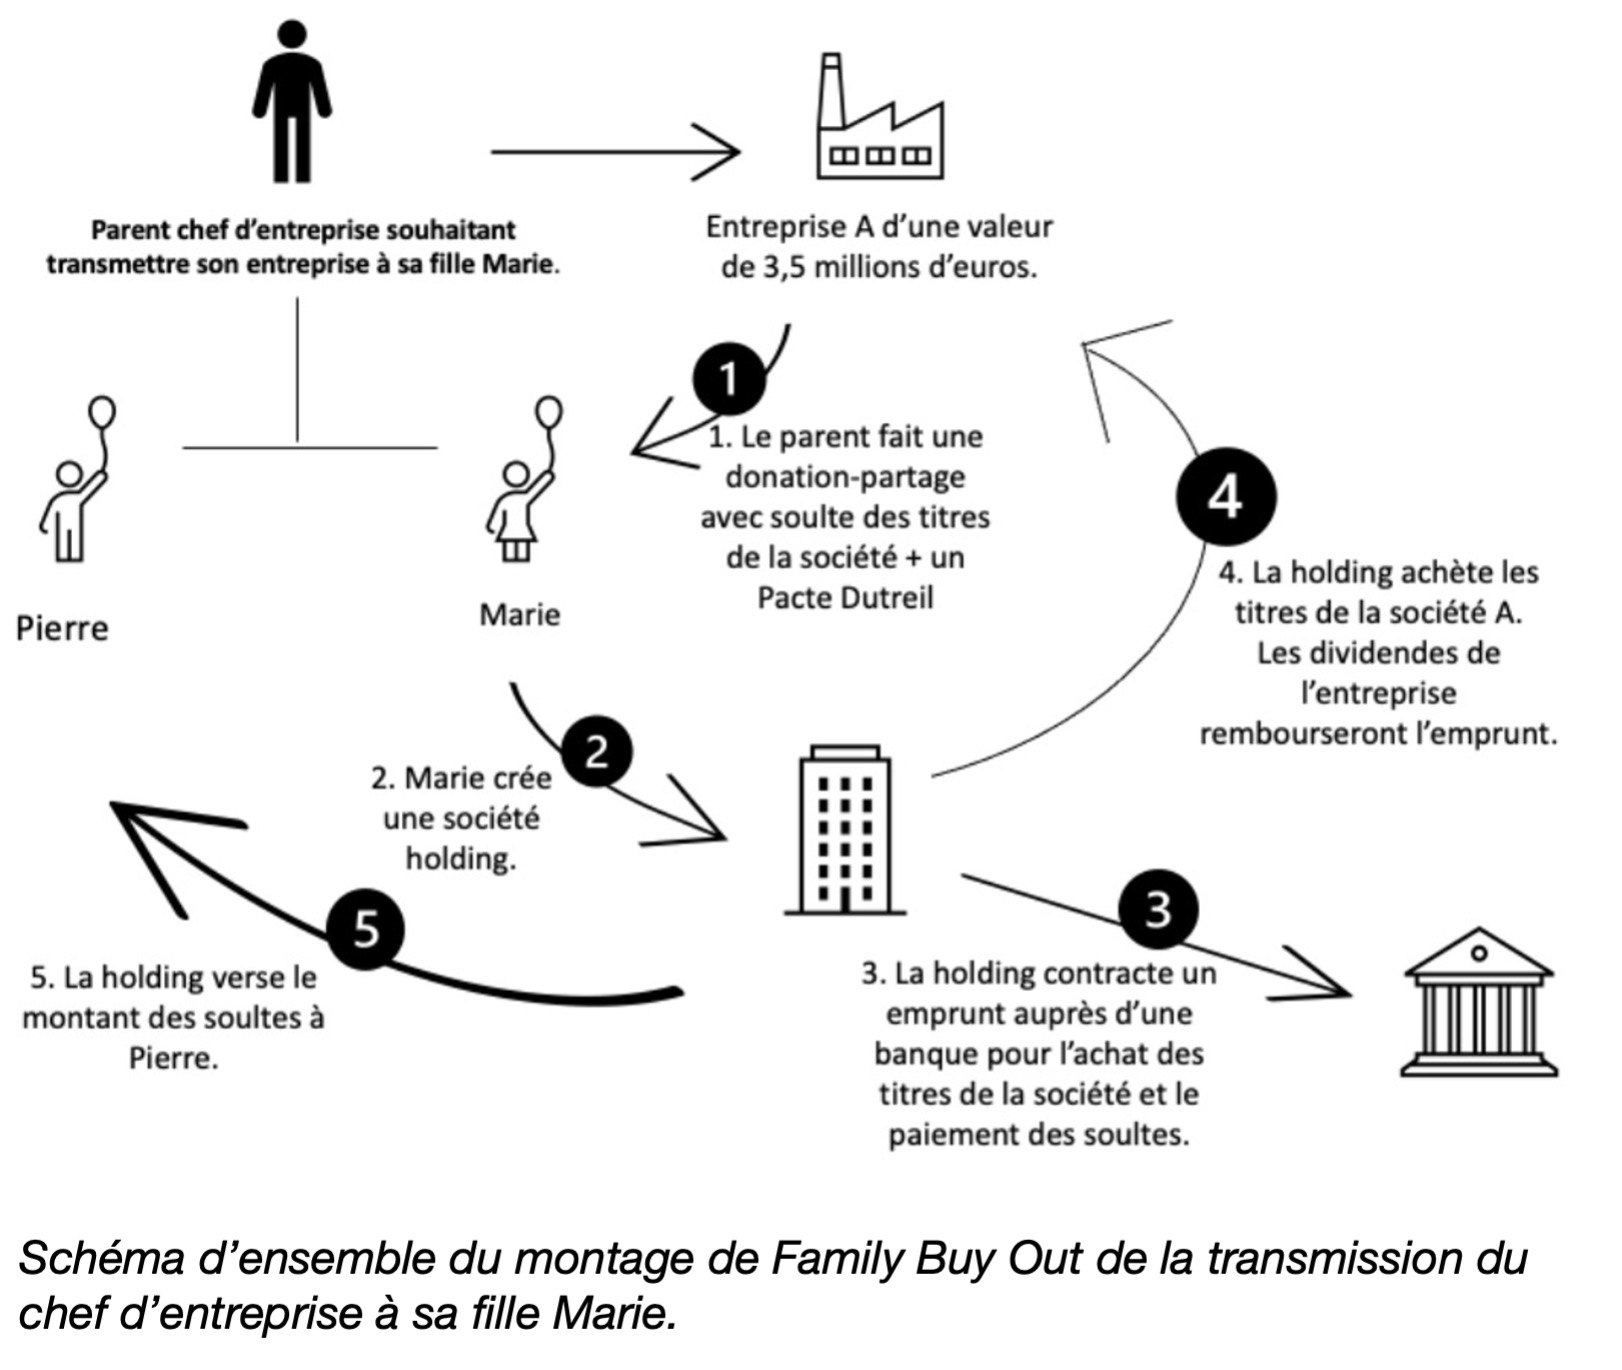 Family Buy Out (FBO) : Fonctionnement